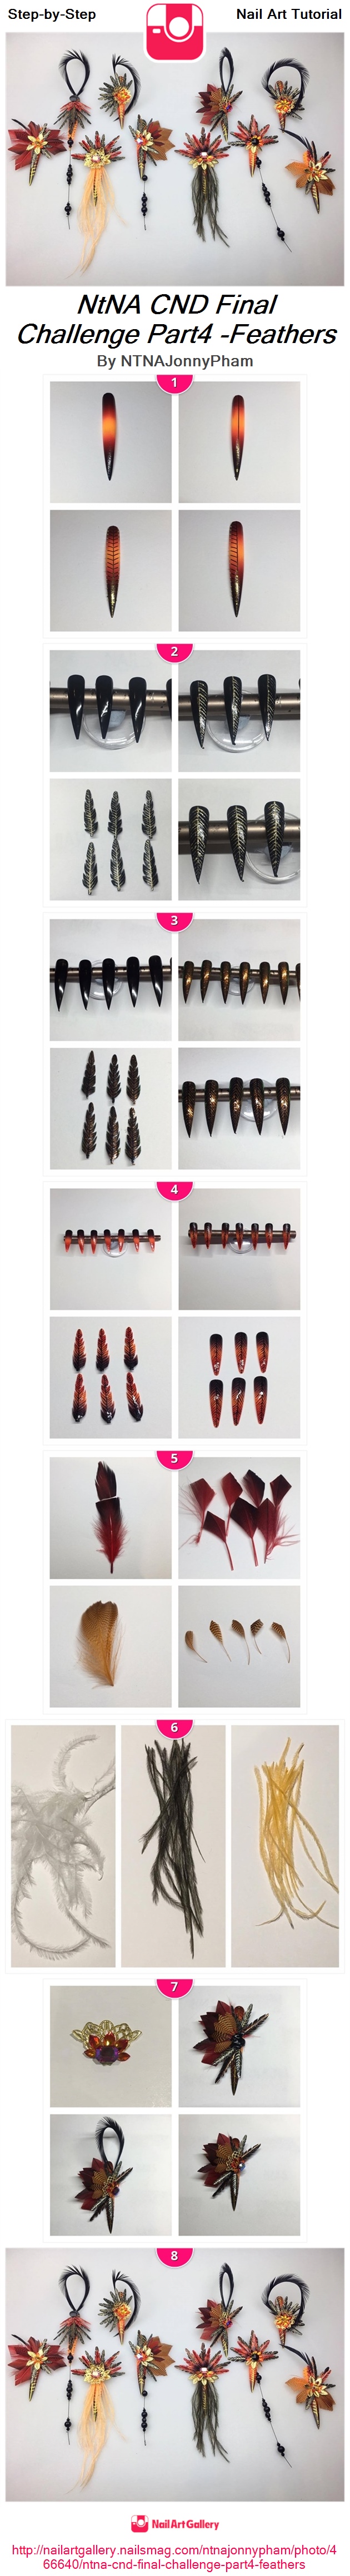 NtNA CND Final Challenge Part4 -Feathers - Nail Art Gallery